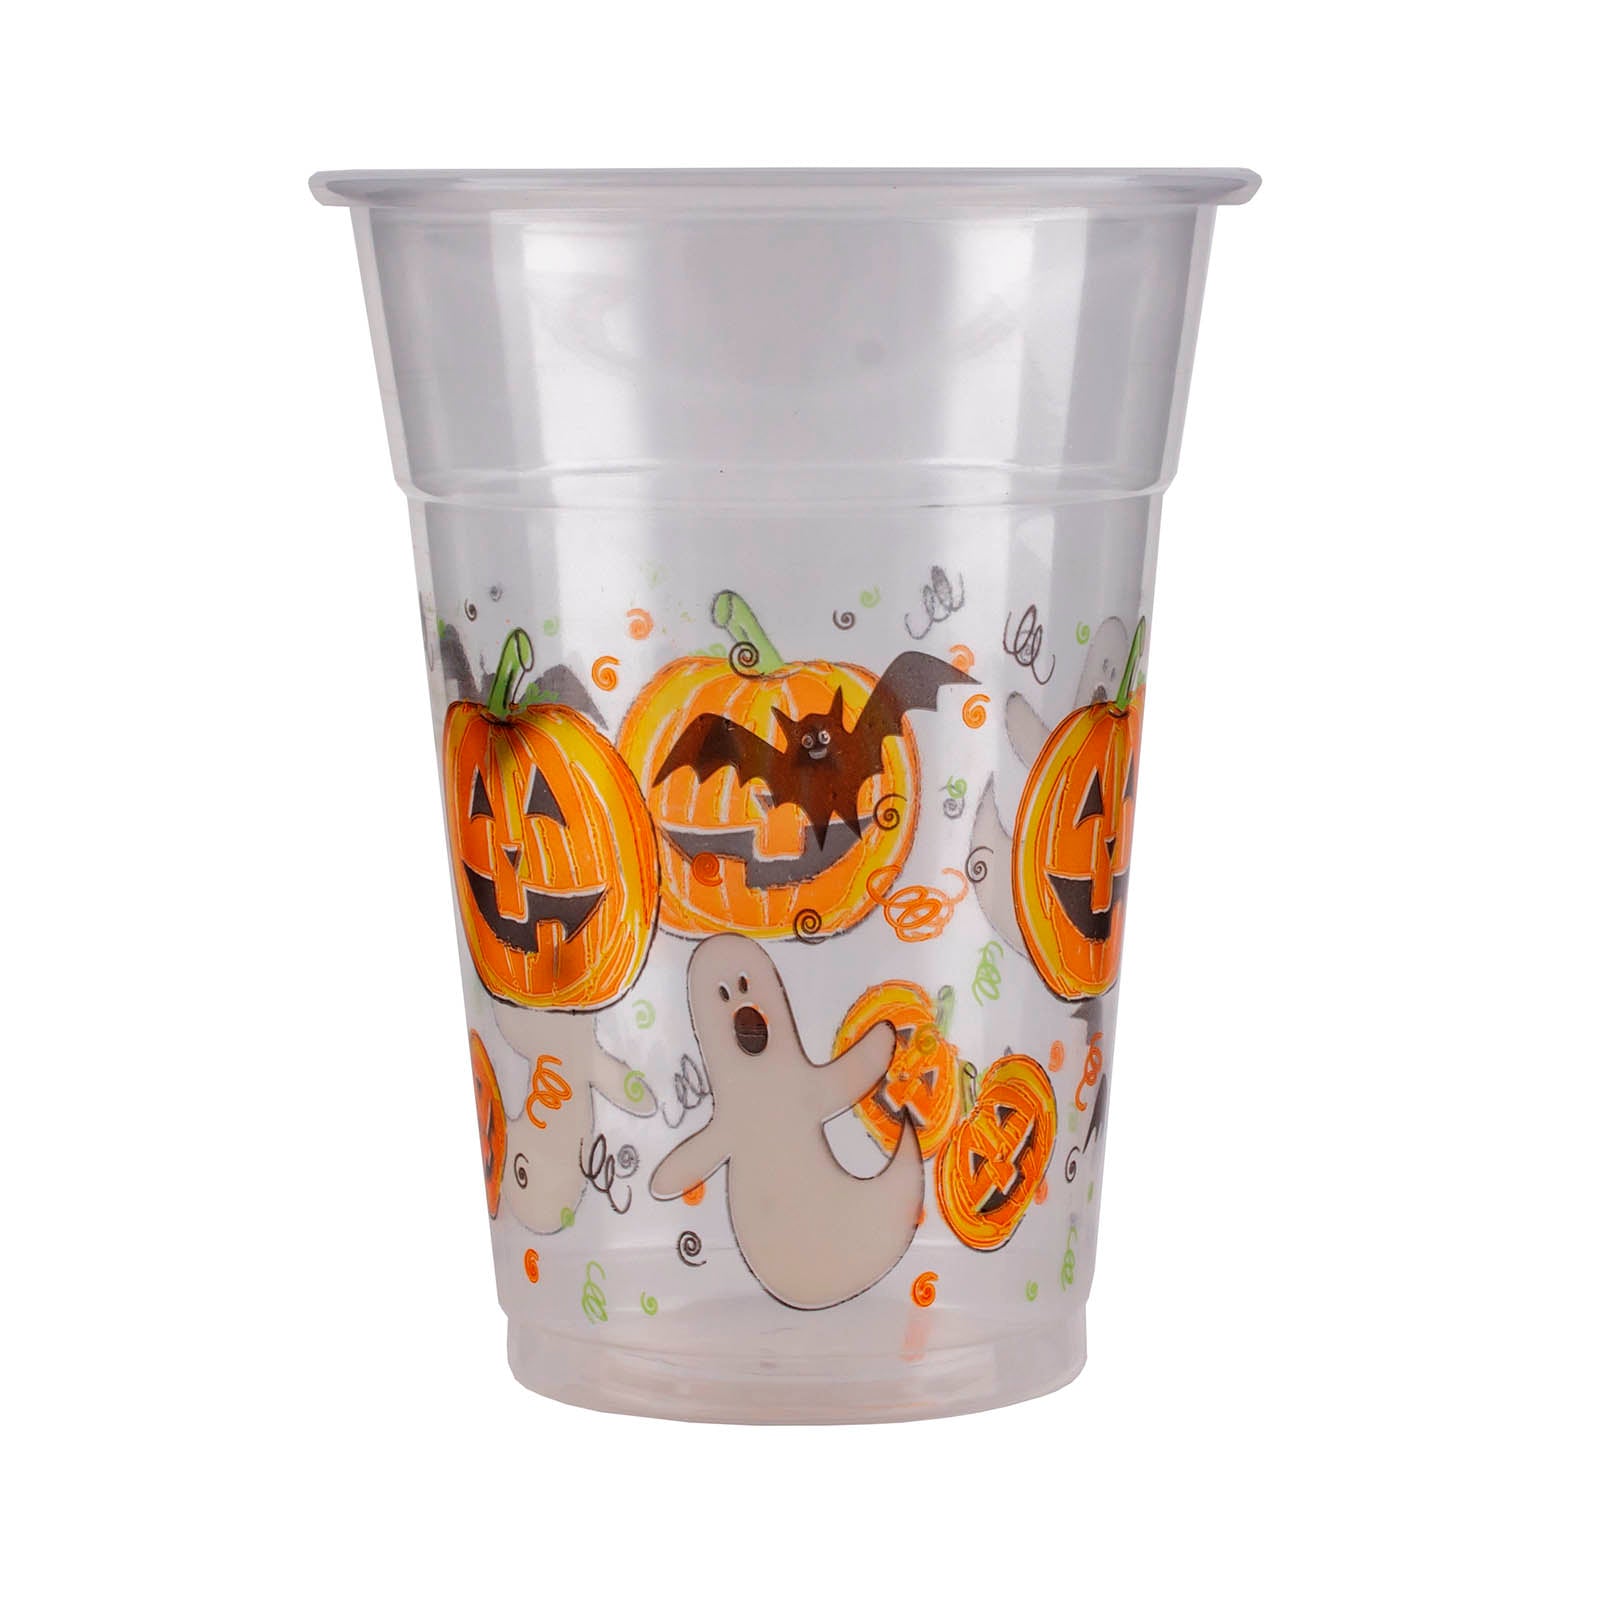 https://www.shopbarproducts.shop/wp-content/uploads/1688/68/soft-plastic-cups-halloween-20-ct-16-ounce-barproducts-com-get-the-look-for-a-lower-cost_0.jpg